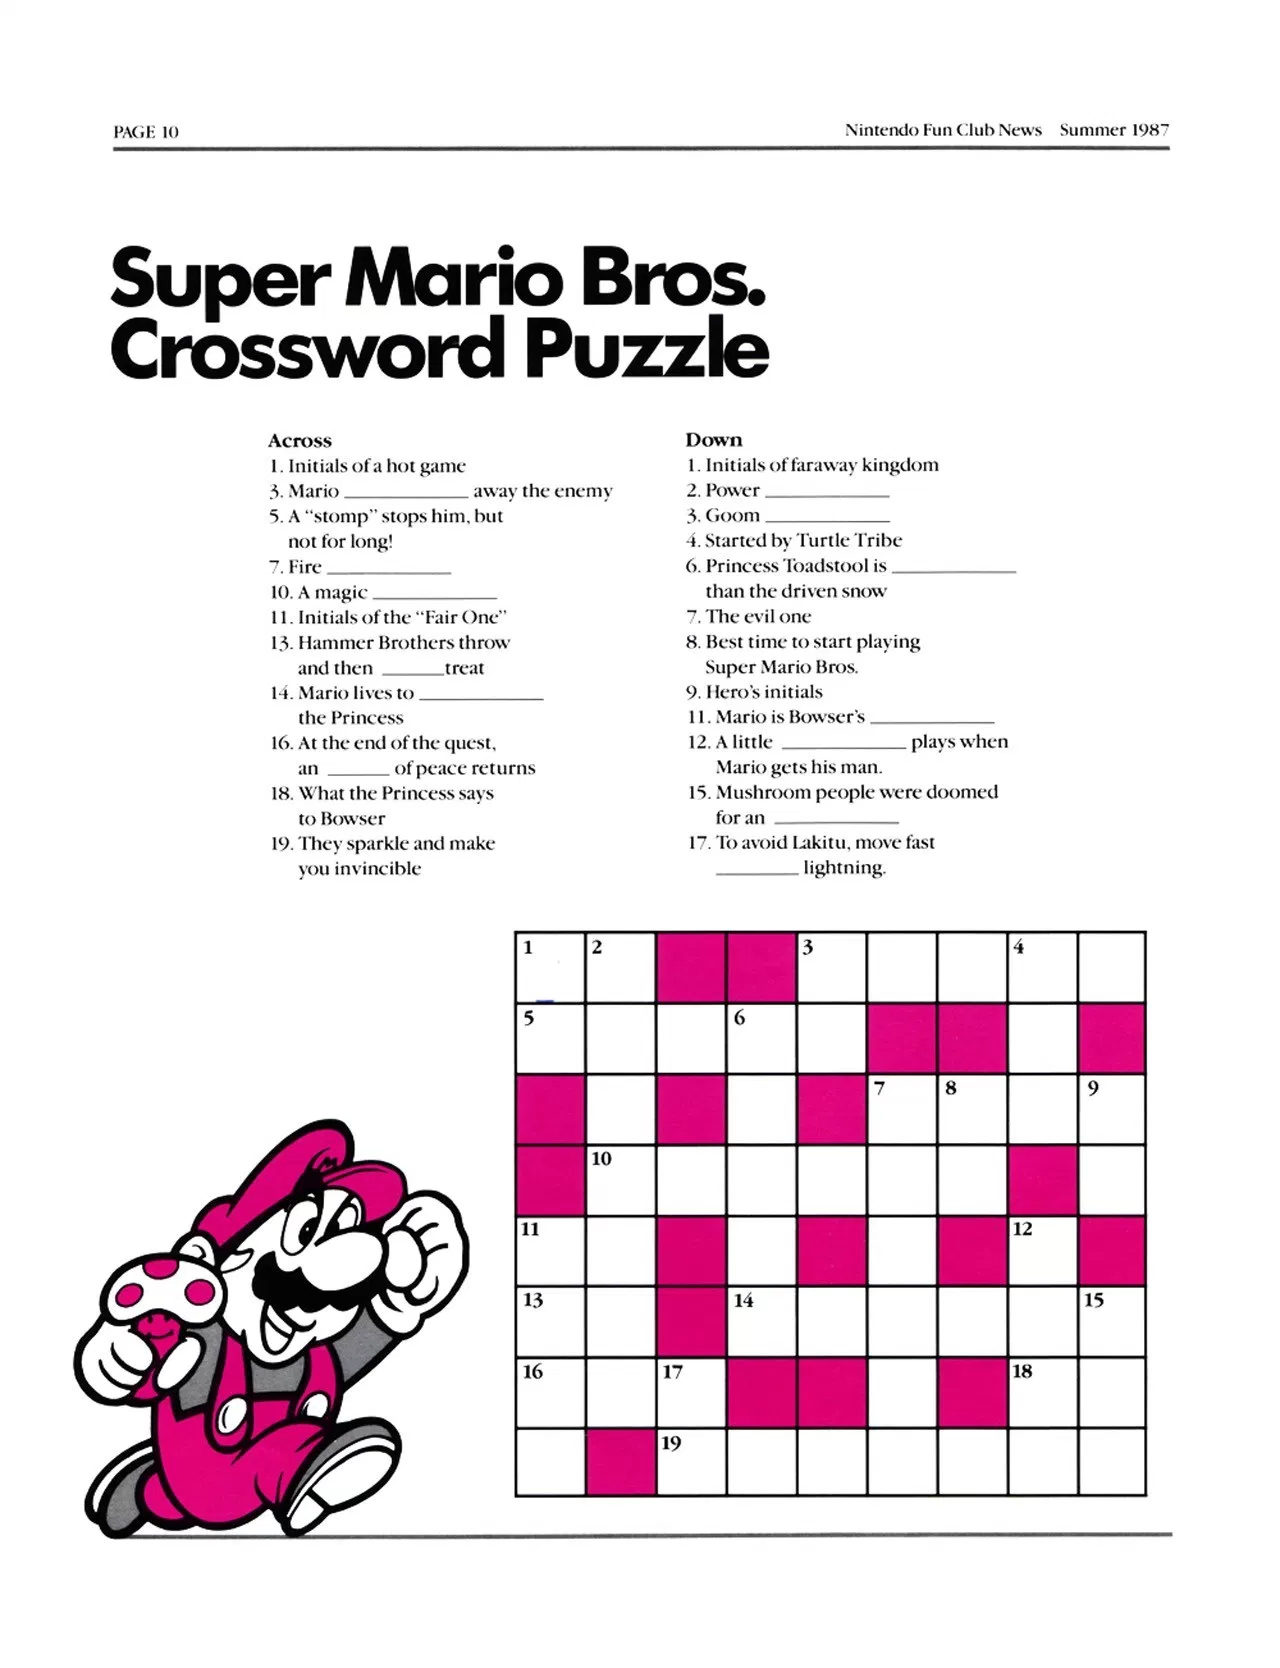 This Crossword Puzzle Is Bs - Video Game Forums - Printable Video Game Crossword Puzzles